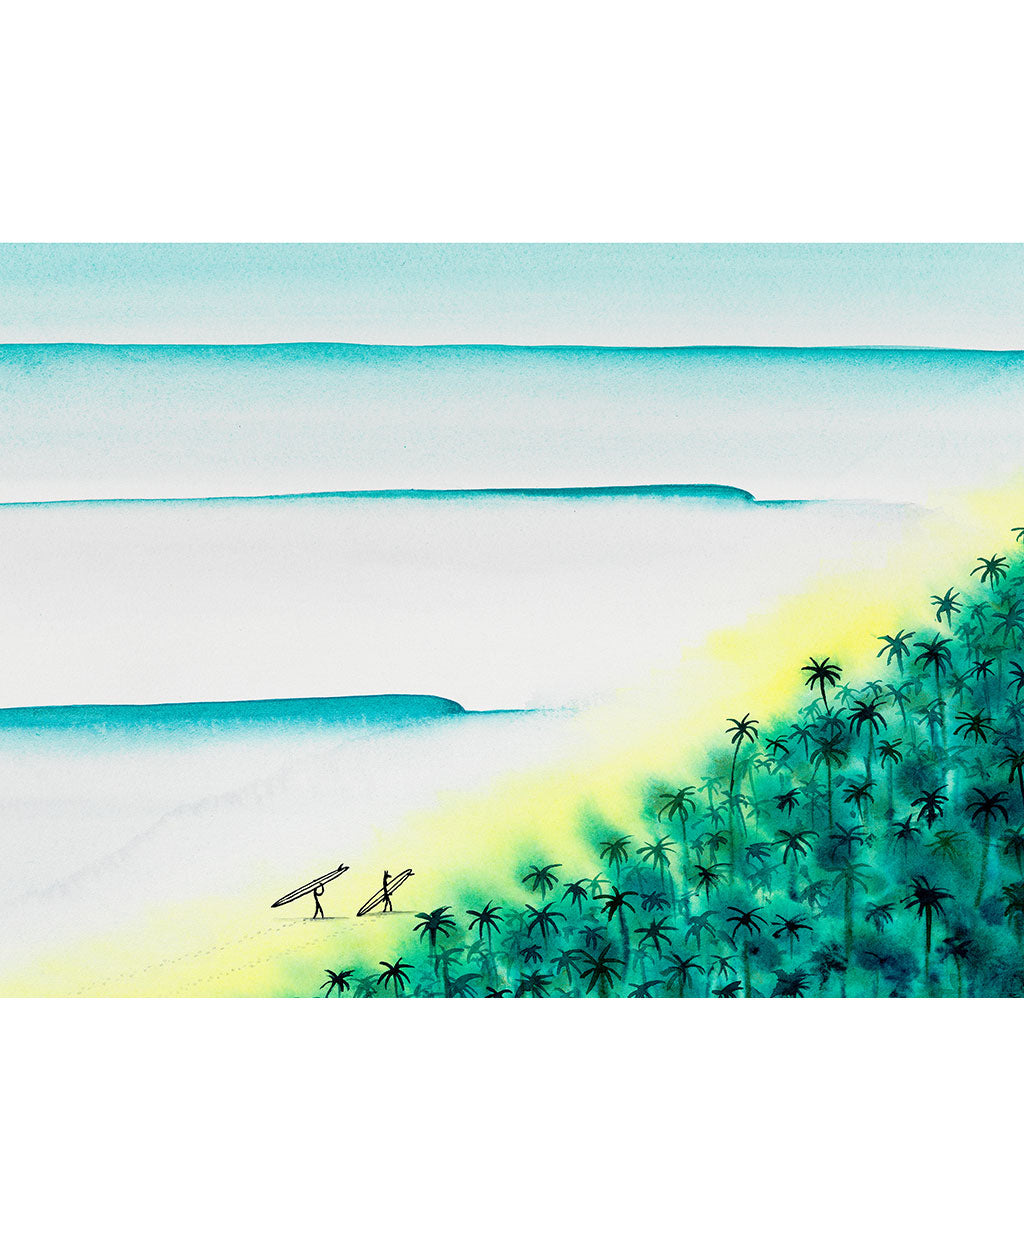 Two Surfers - Print/ Framed Print